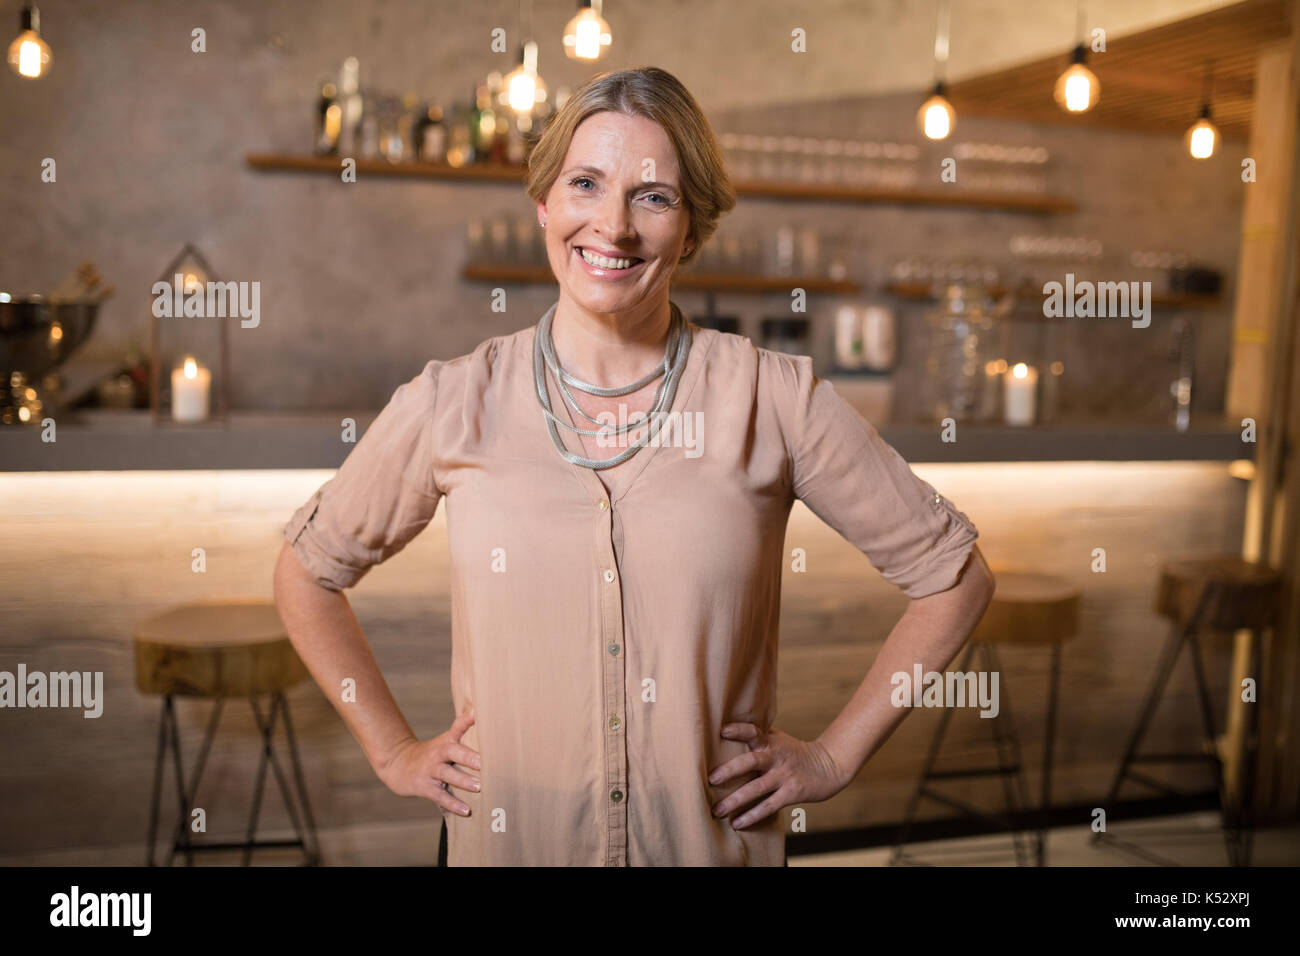 Portrait of beautiful woman standing with hands on hip in restaurant Stock Photo